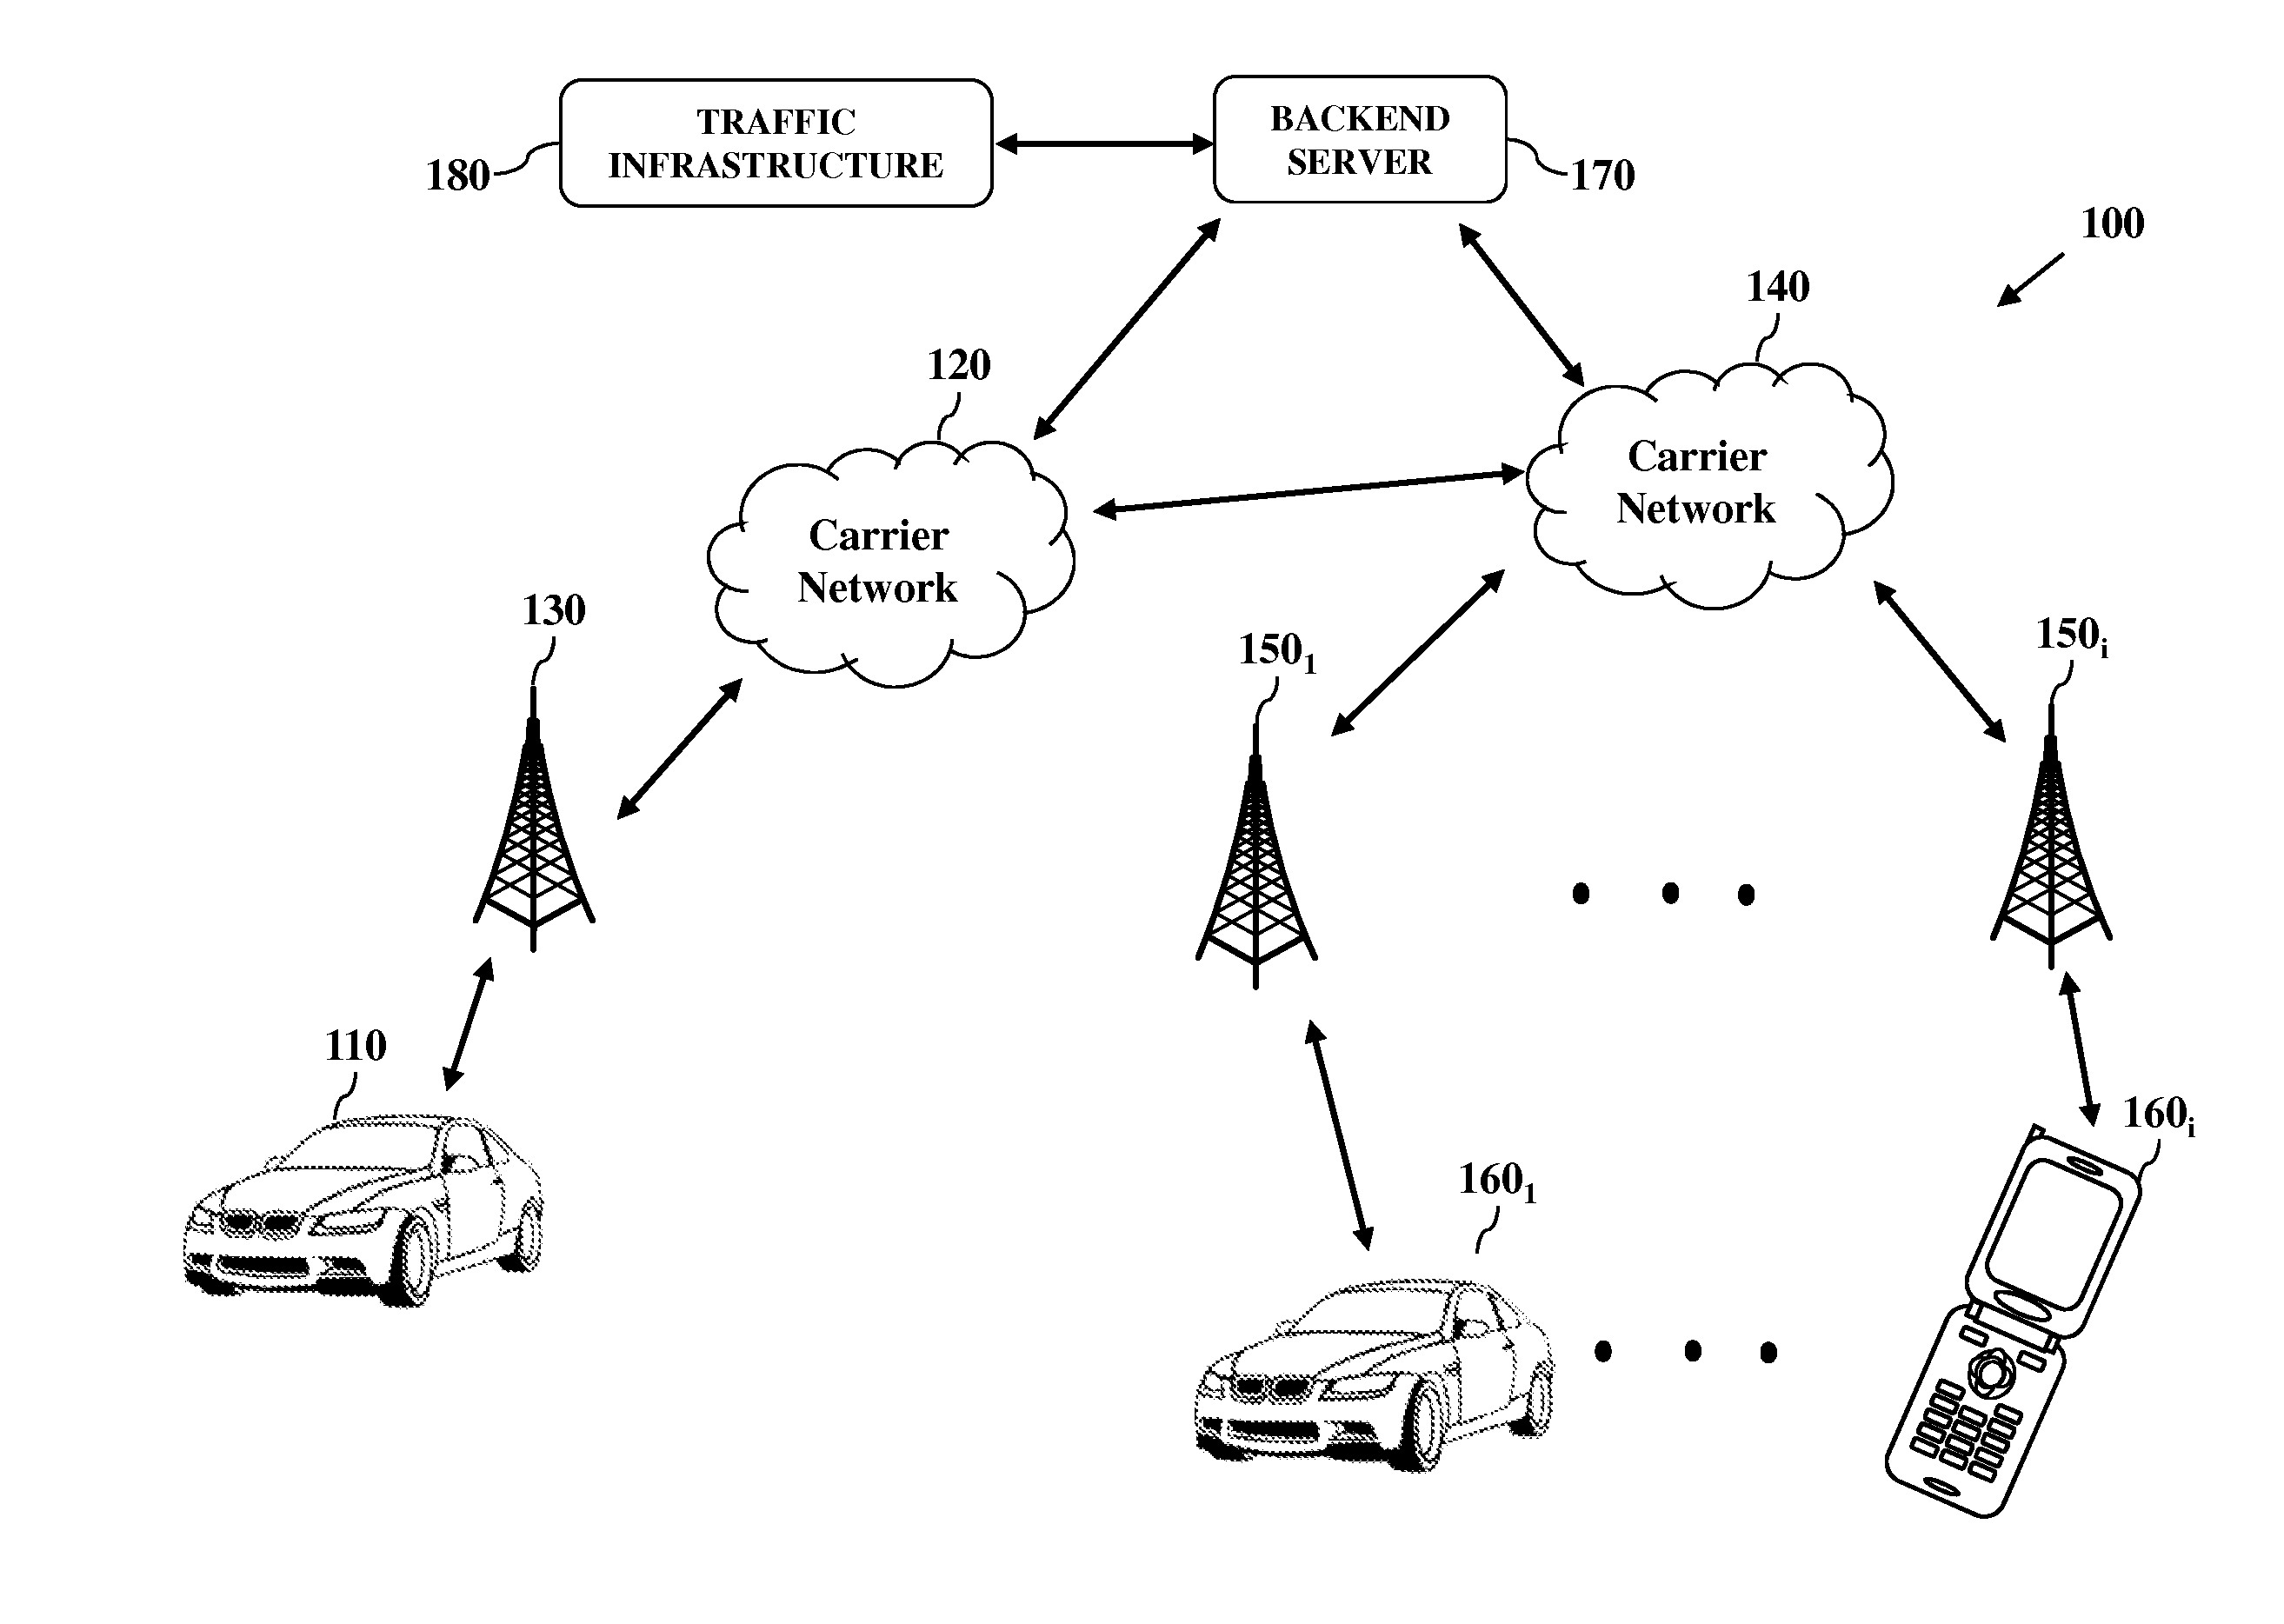 System and Method for Providing Geographically-Relevant Informantin to Mobile Users